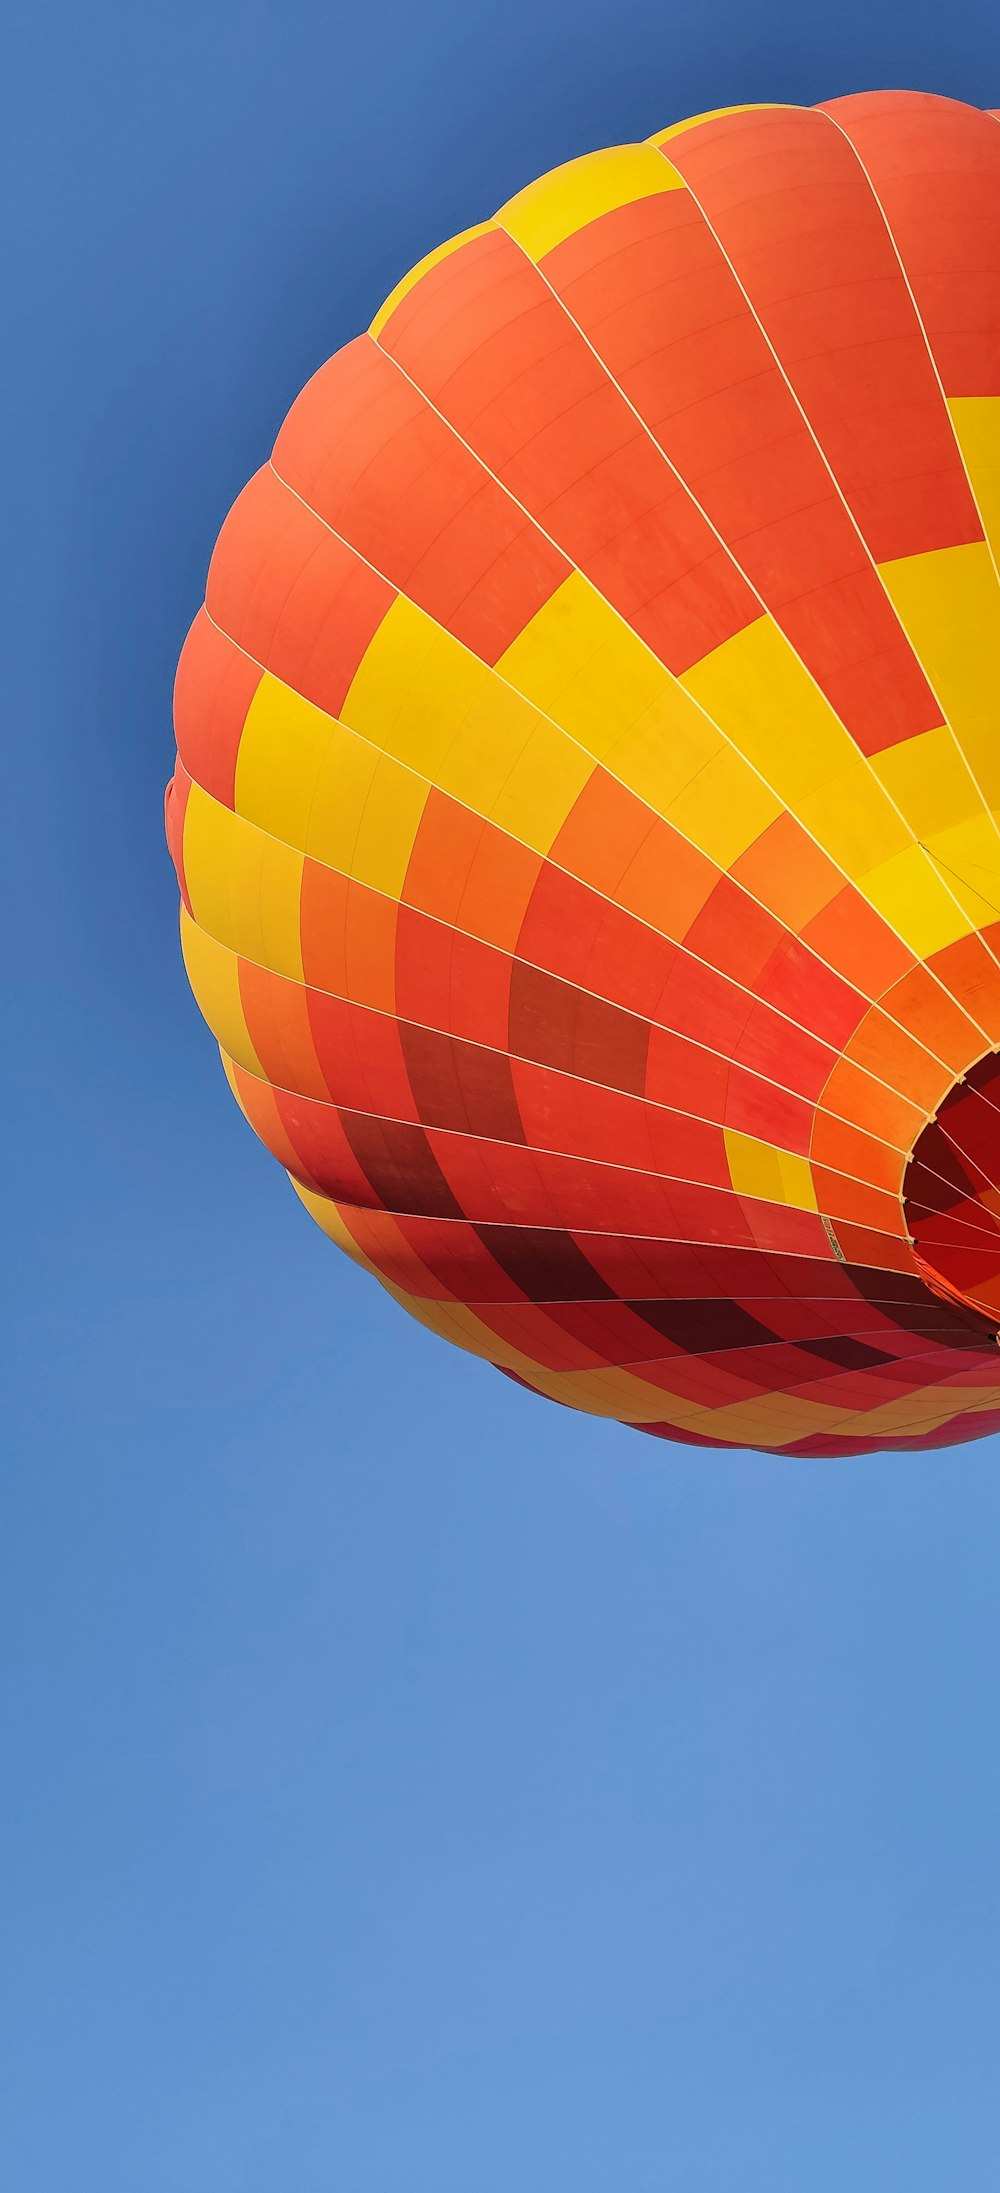 red and yellow hot air ballooning during daytime